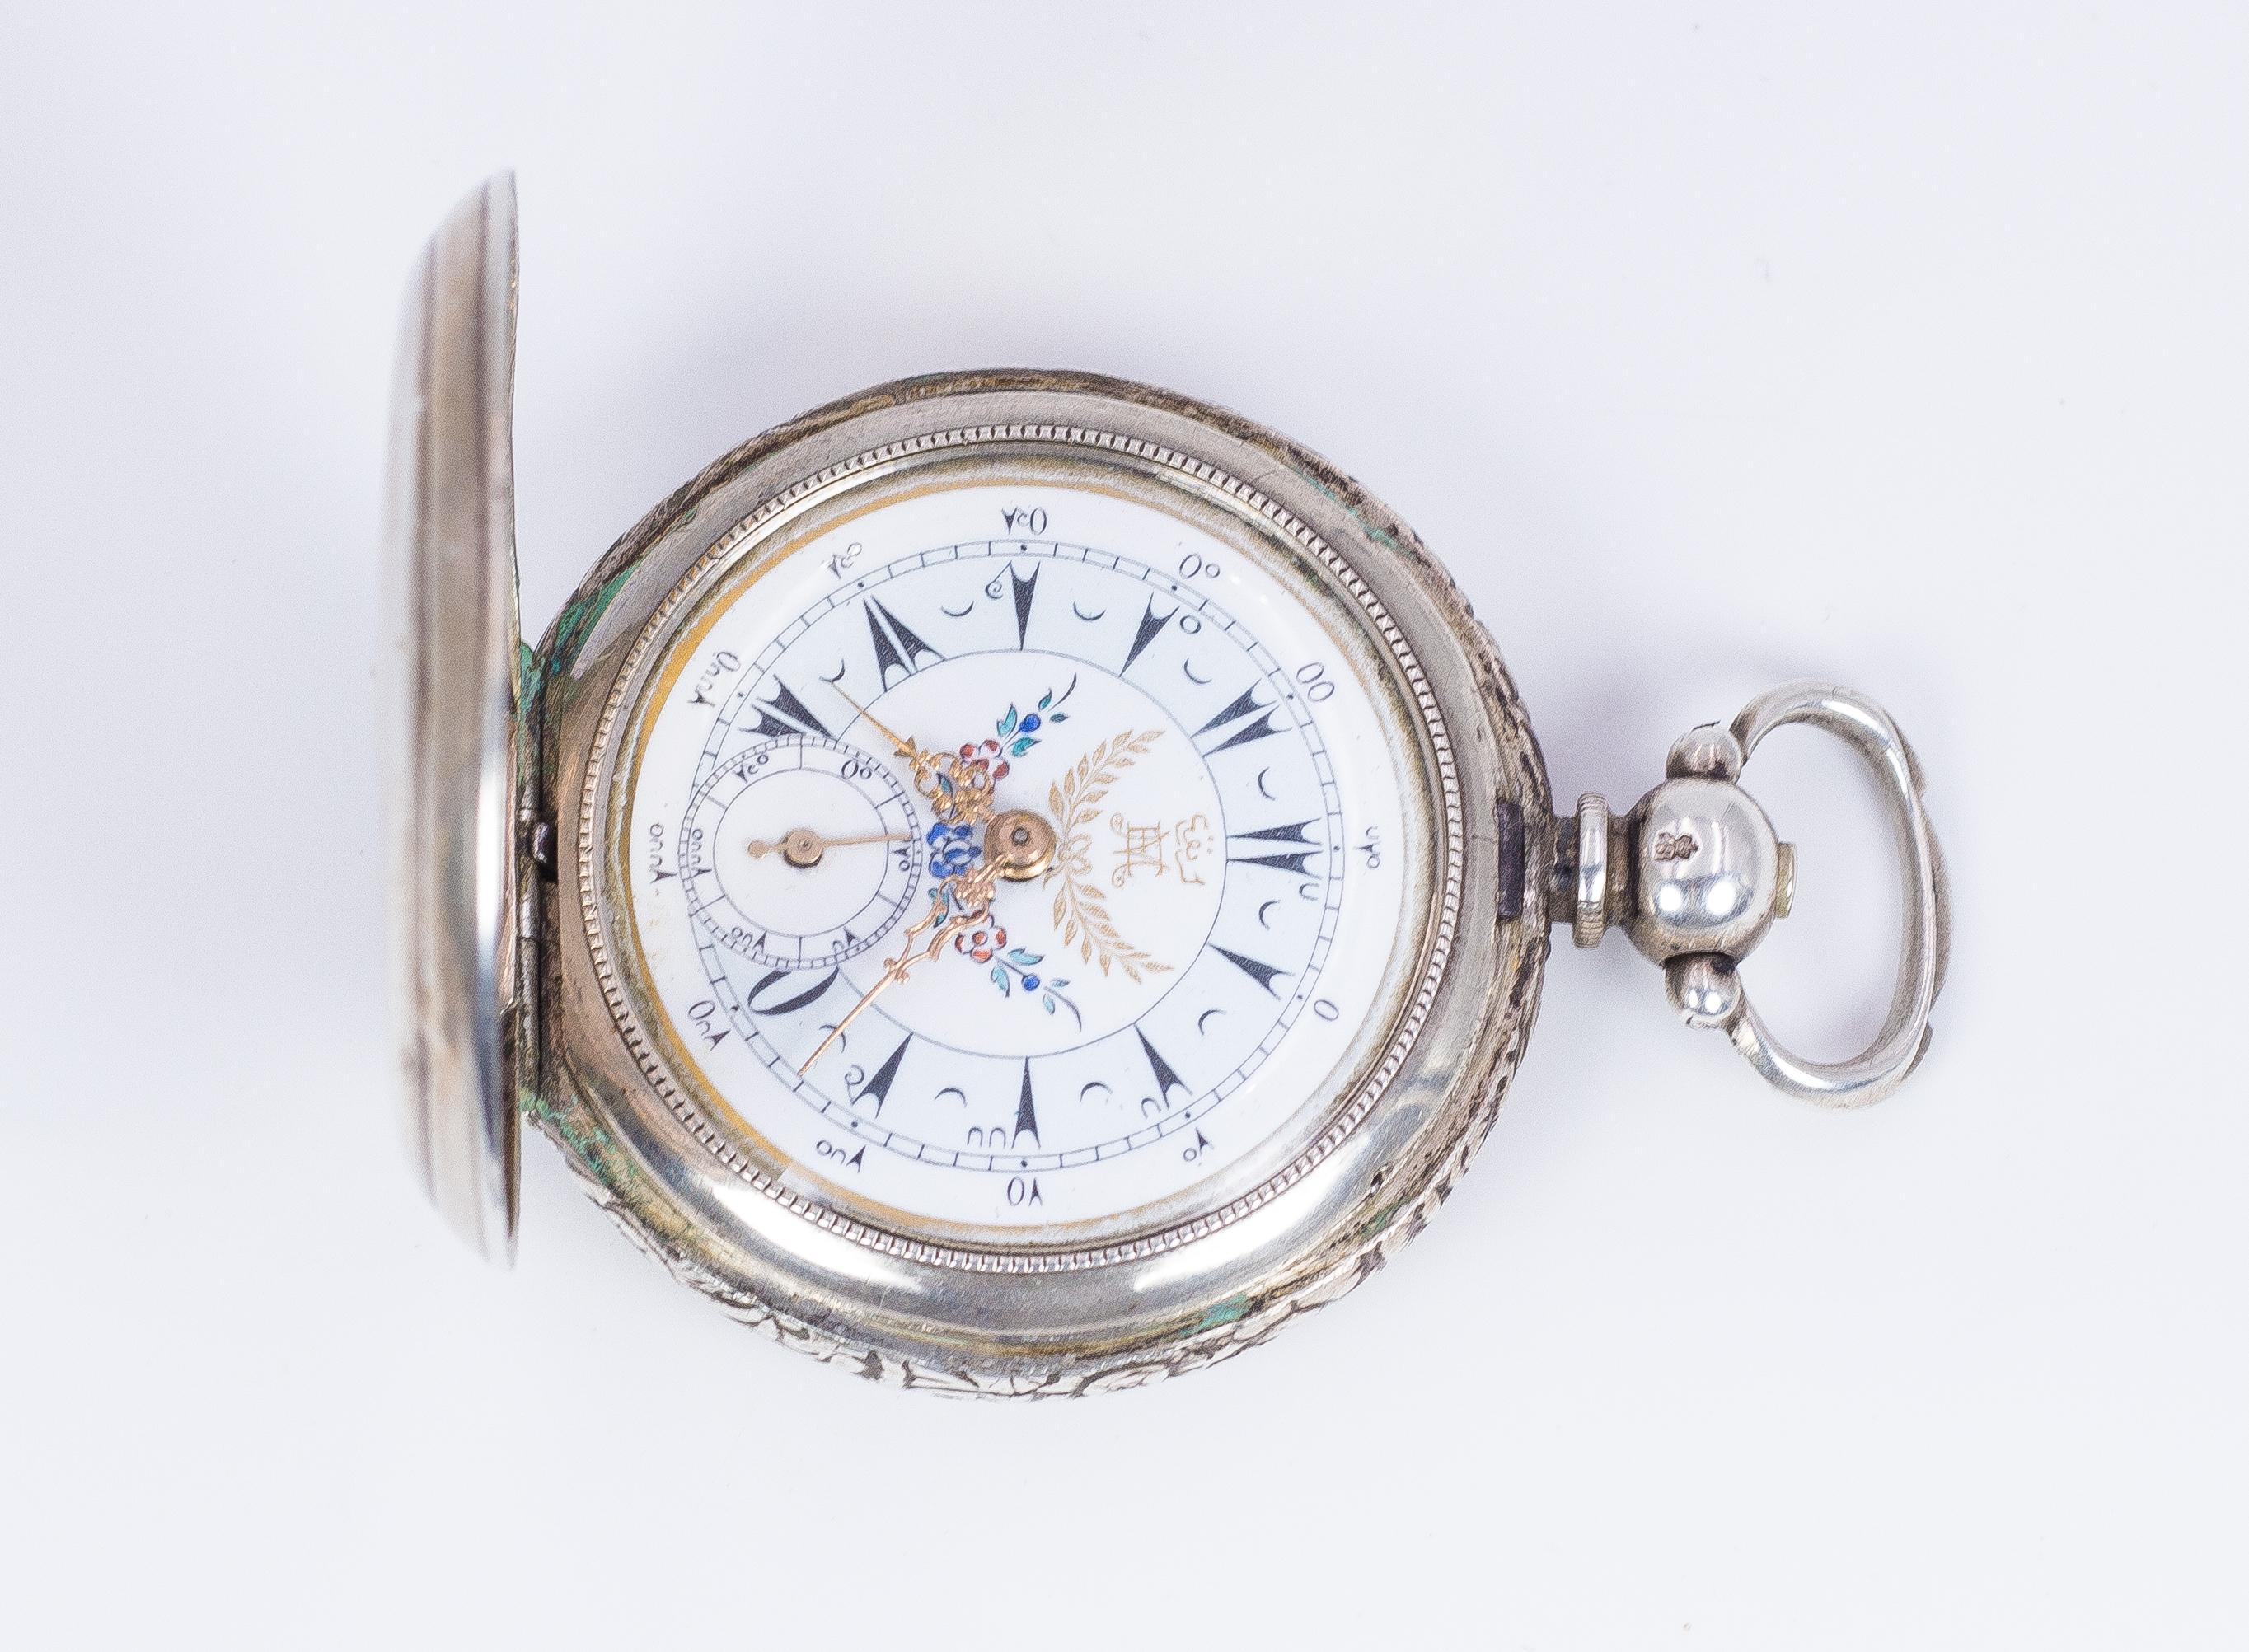 An antique Turkish silver pocket watch, dating from the late 19th Century.

MATERIALS
Silver

MEASUREMENTS
Diameter: 45 mm